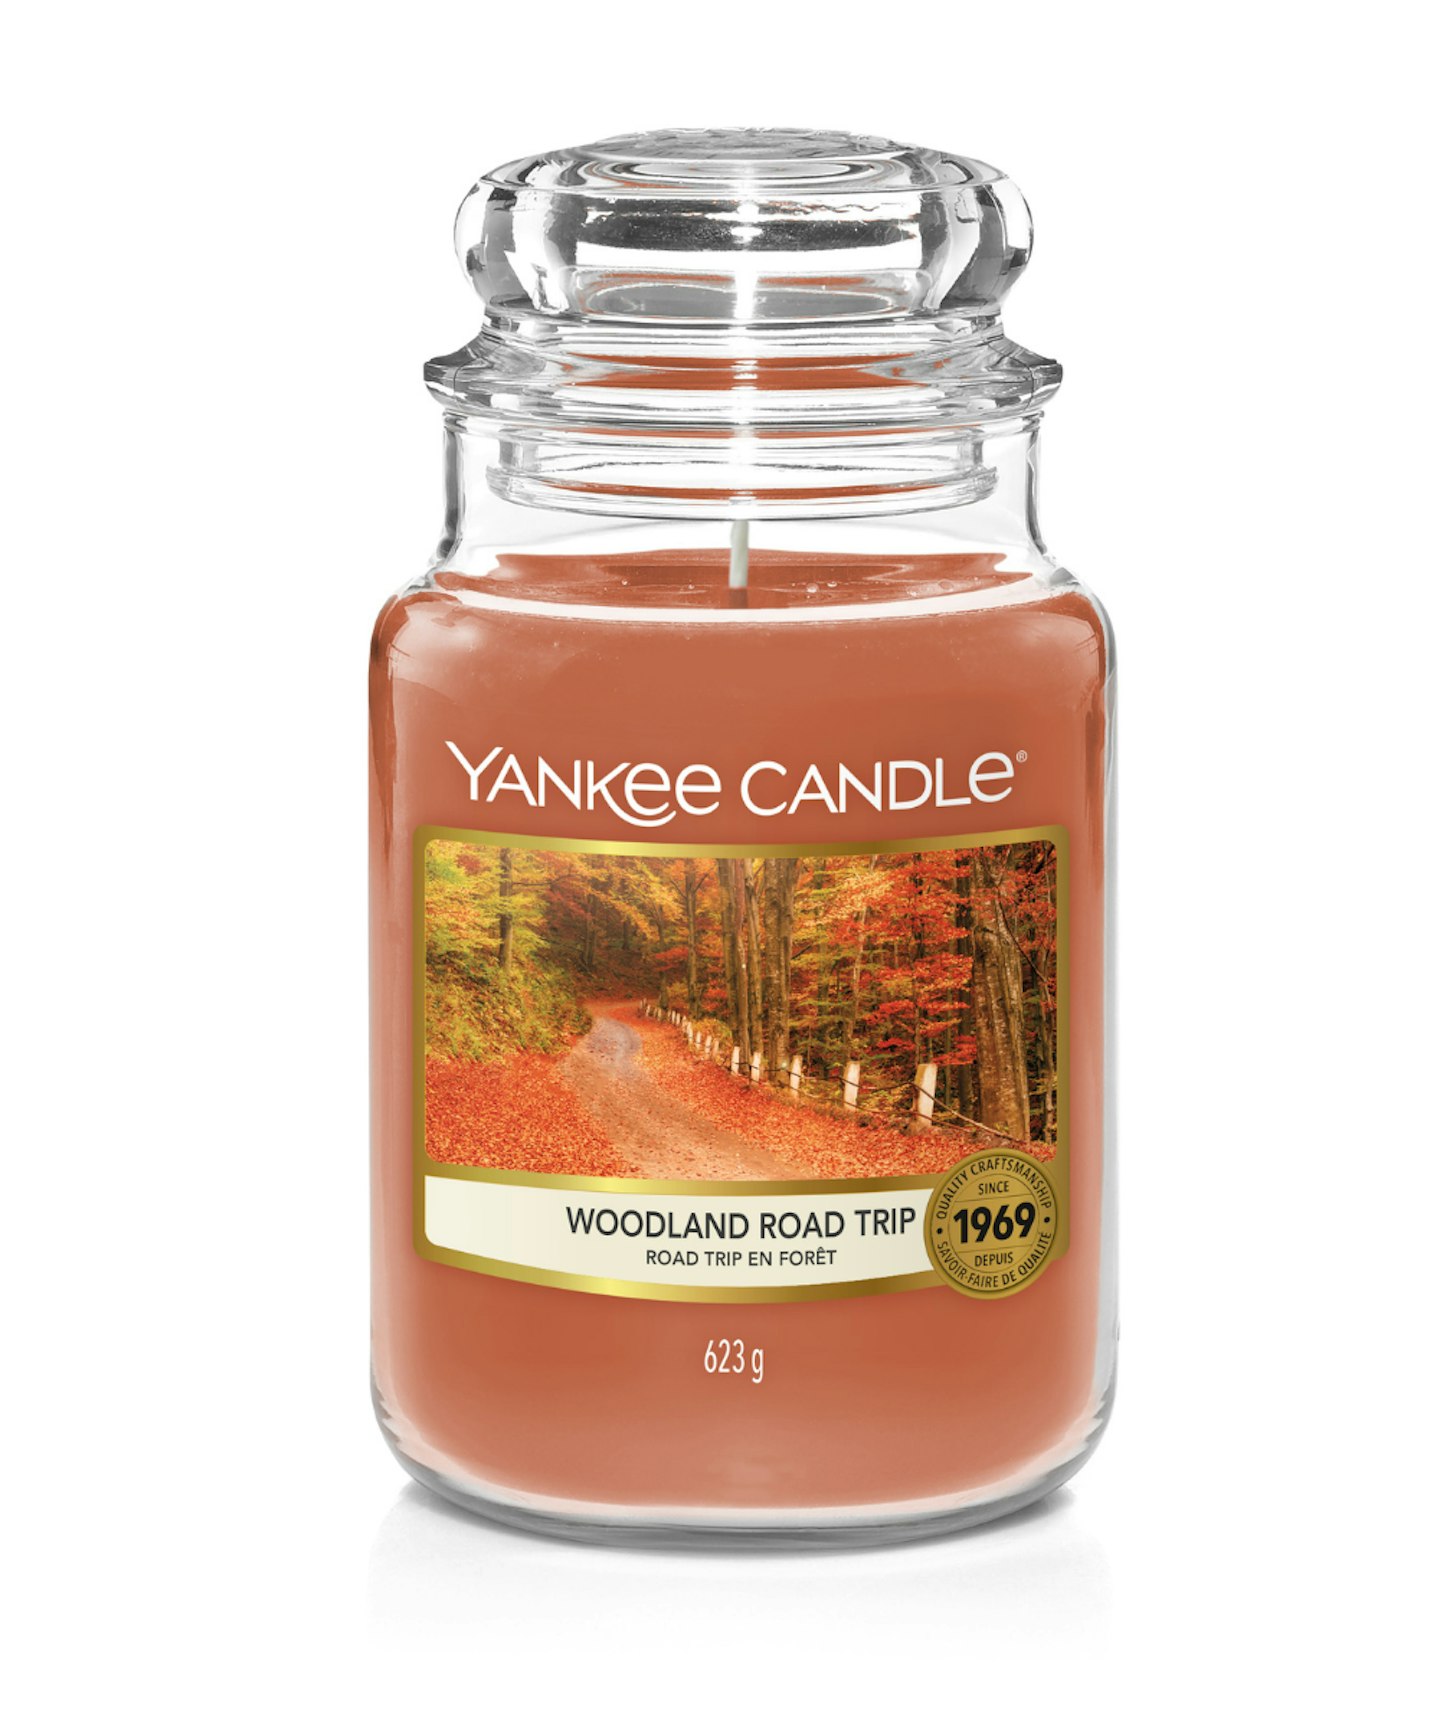 Yankee Candle Candle, Woodland Road Trip (Large)